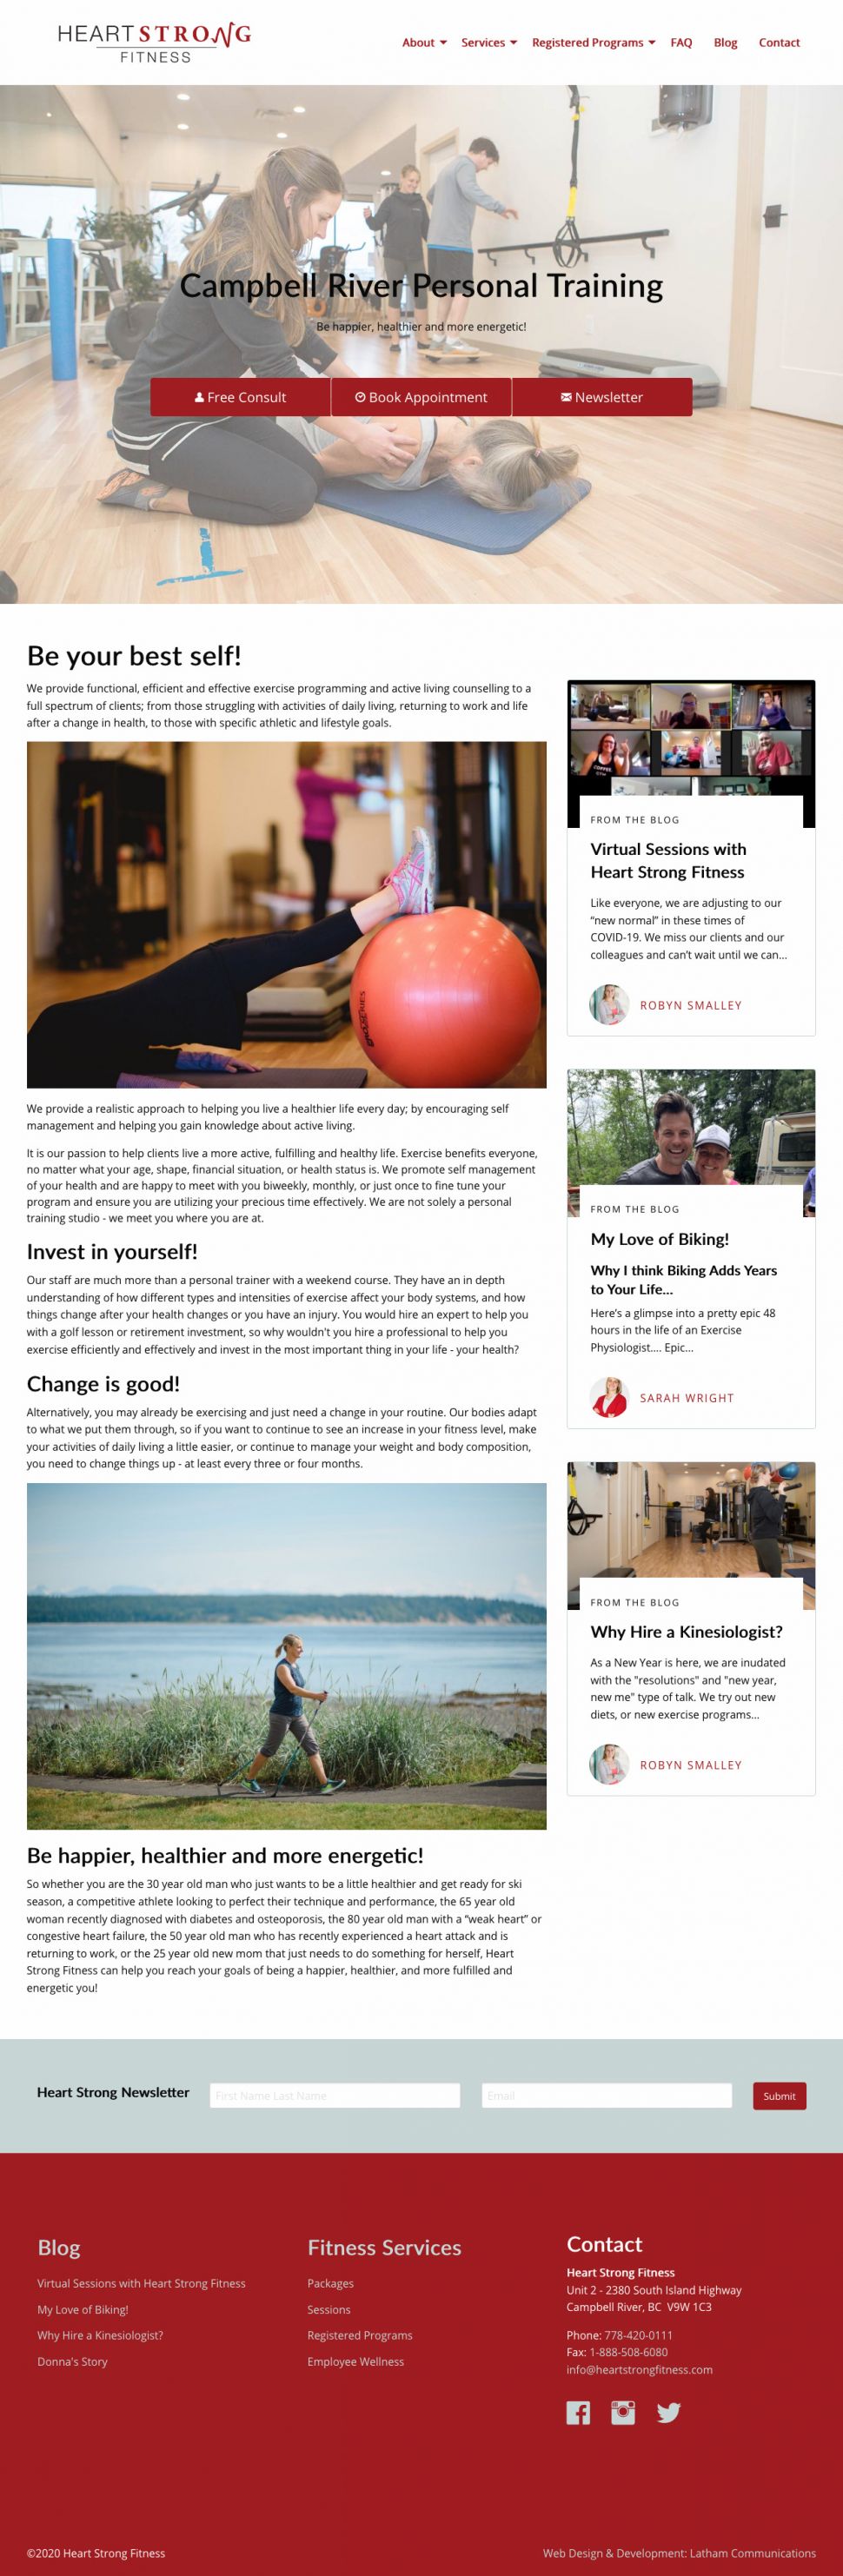 Screenshot of Heart Strong Fitness website home page.